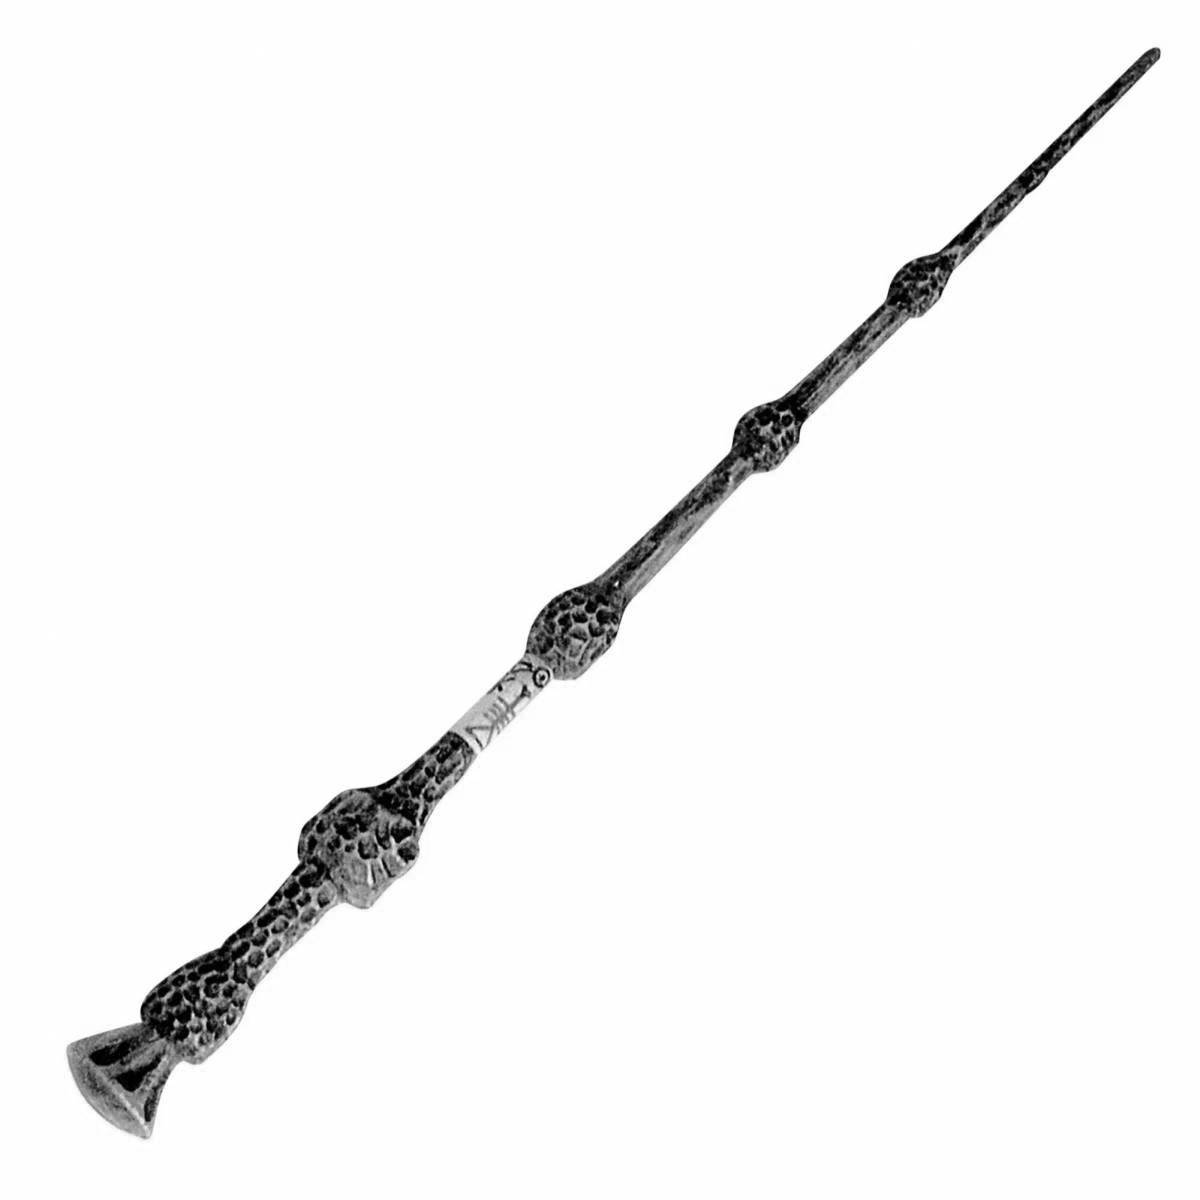 Intricate harry potter magic wand coloring book